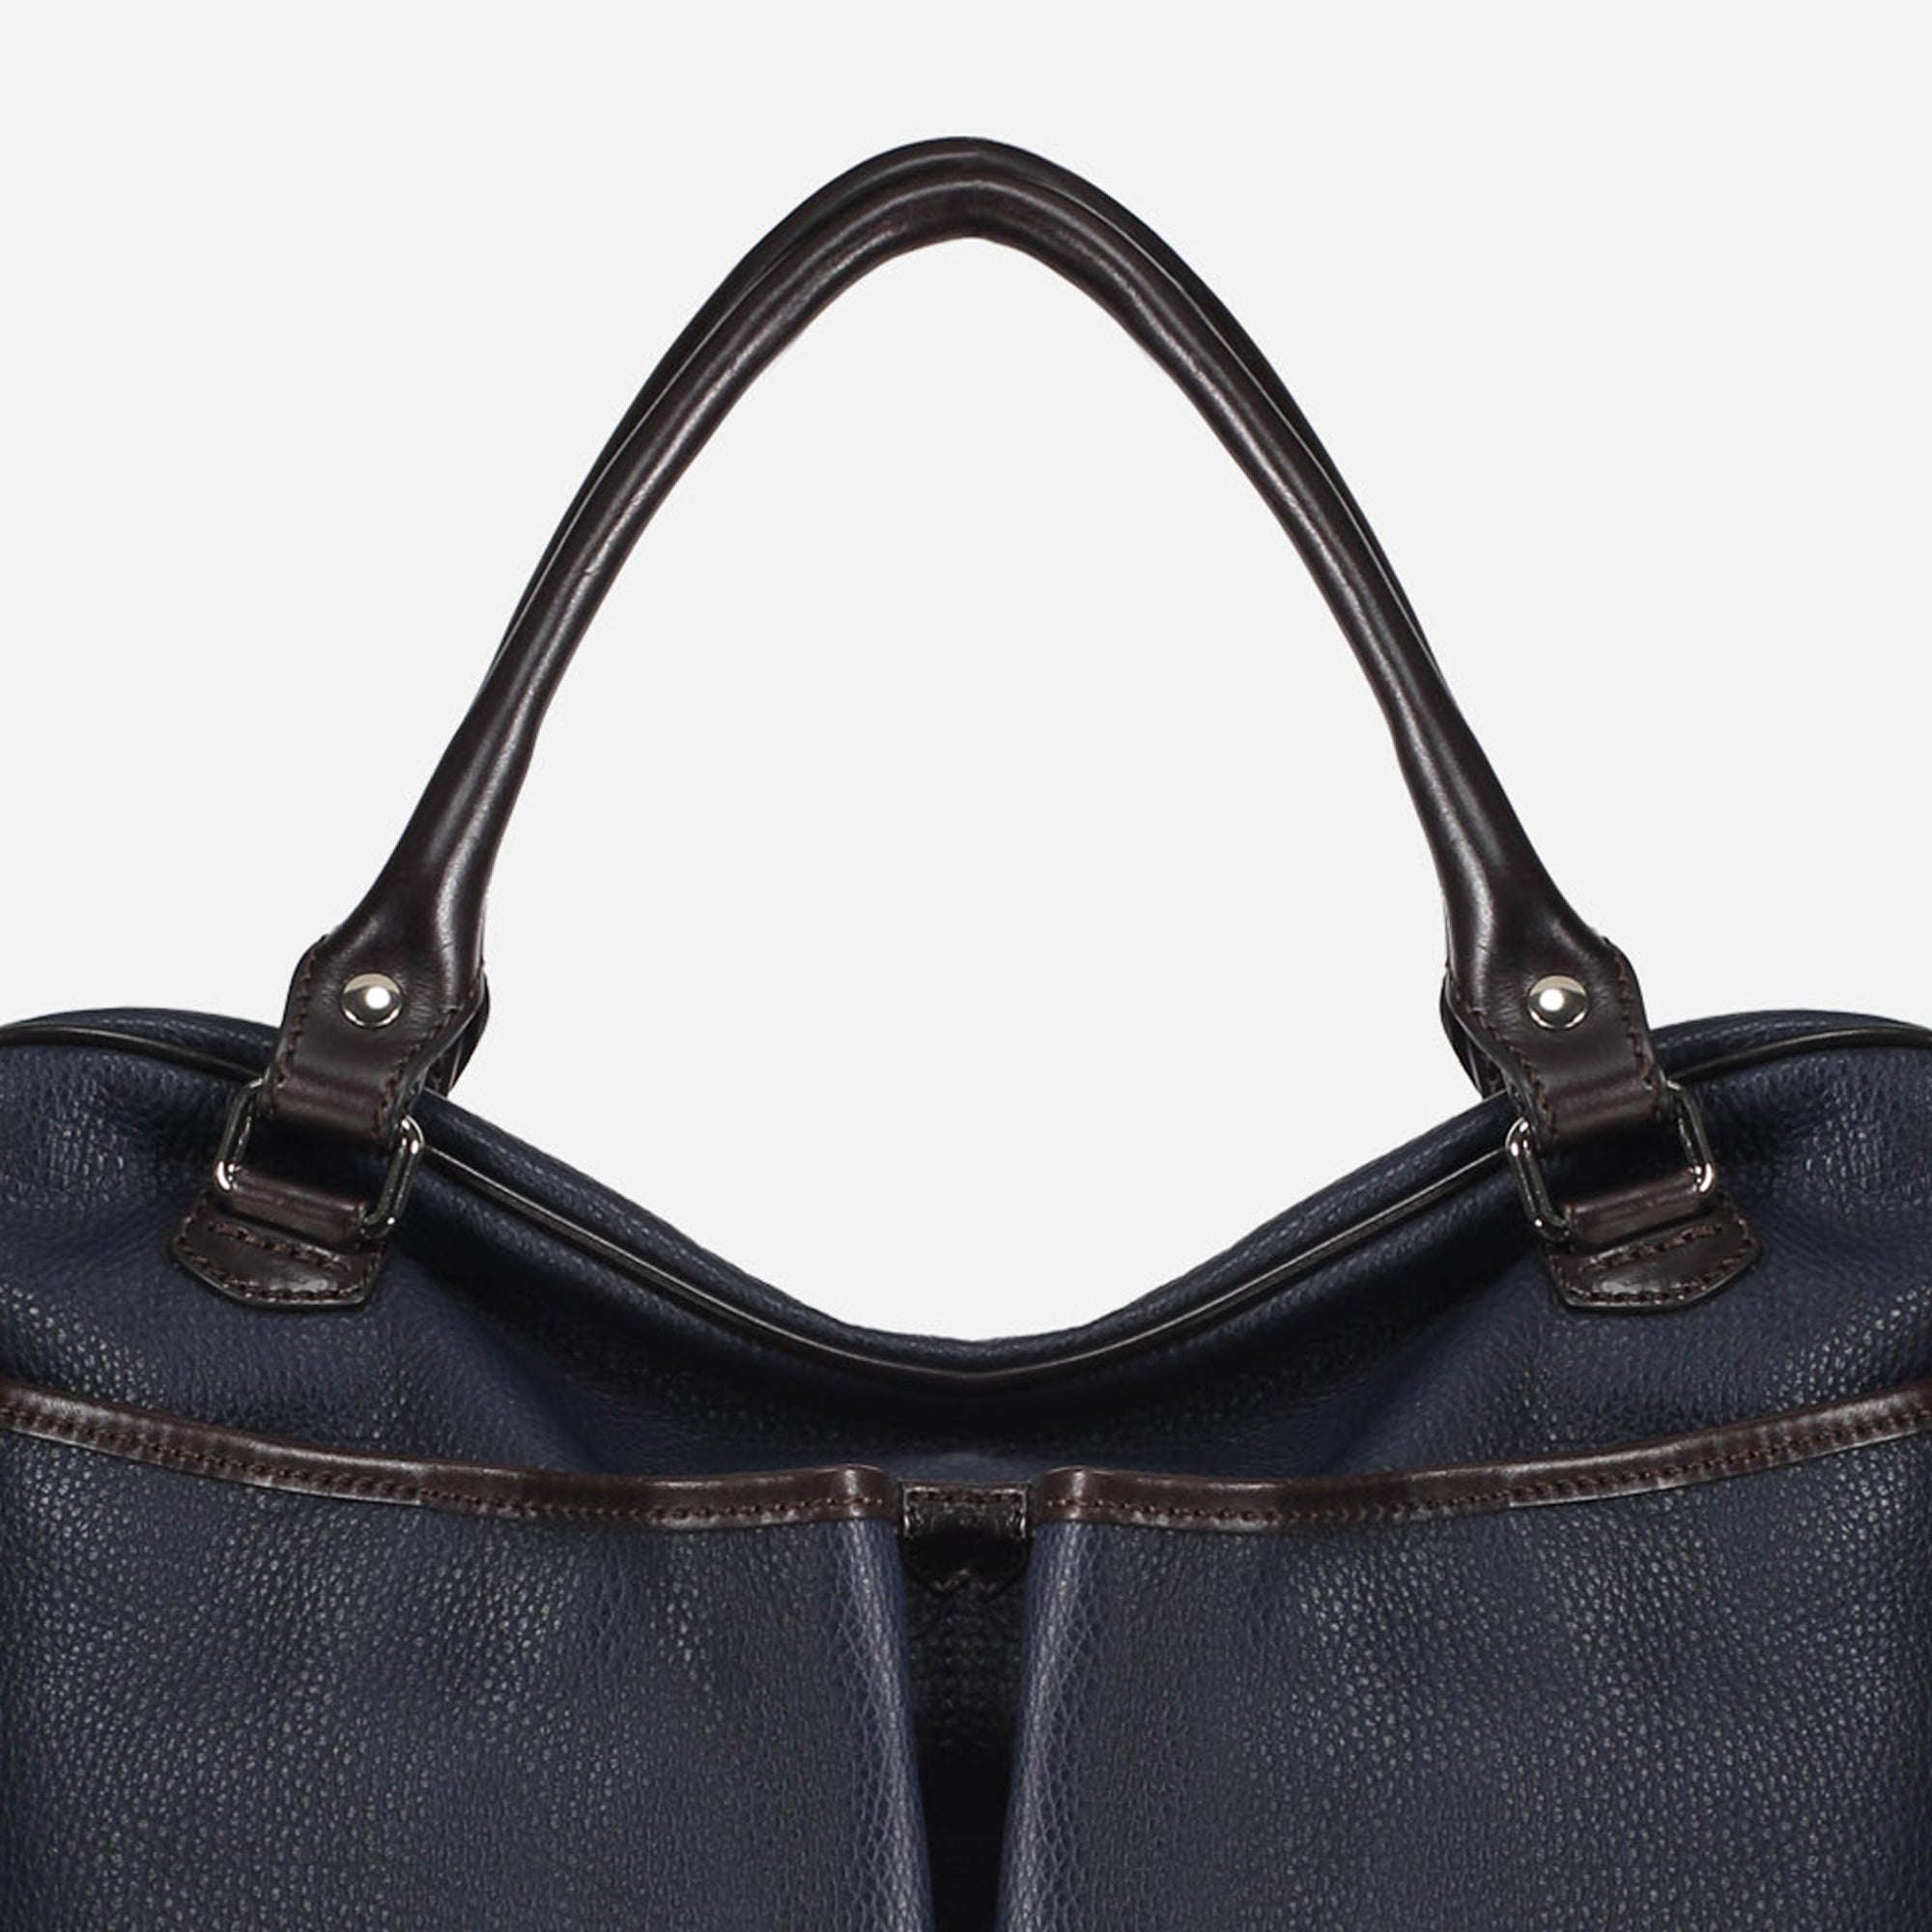 826 - BUSINESS BAG <br> Calf leather briefcase